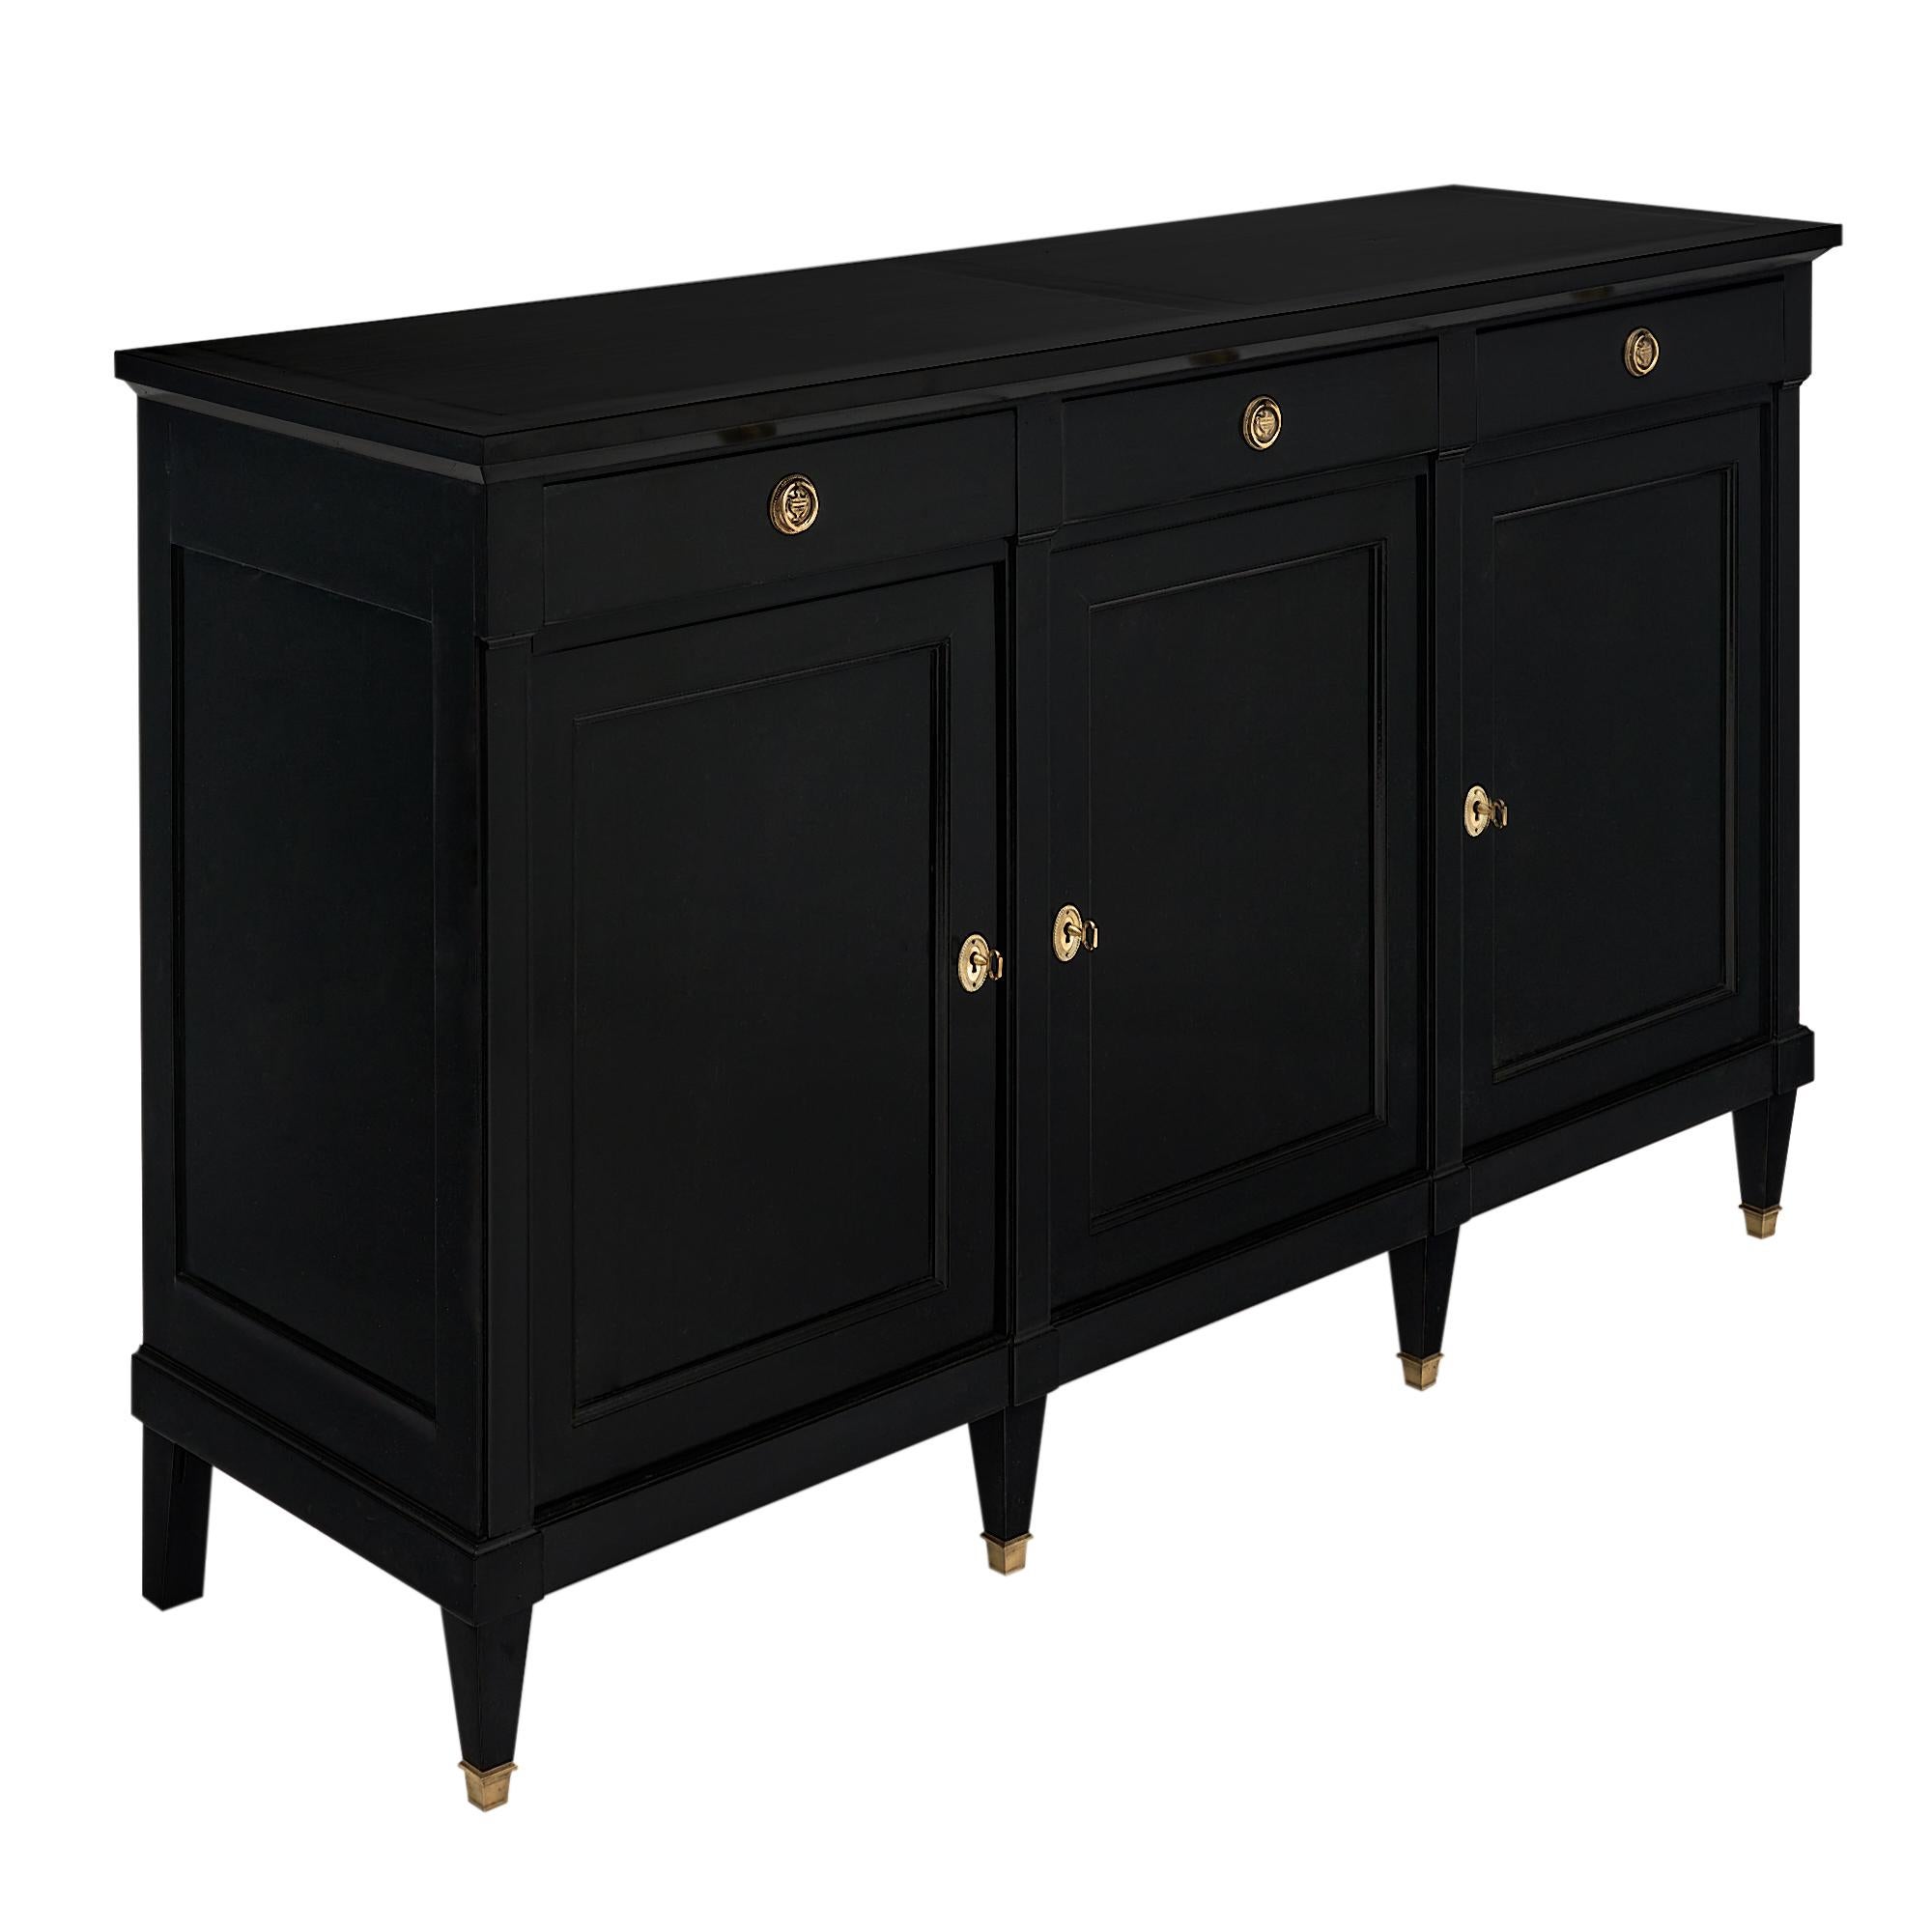 Buffet, enfilade, from France and made of mahogany that has been ebonized and finished in a lustrous museum-quality French polish. There are three doors that open to adjustable shelving. Three dovetailed drawers have brass hardware. The tapered